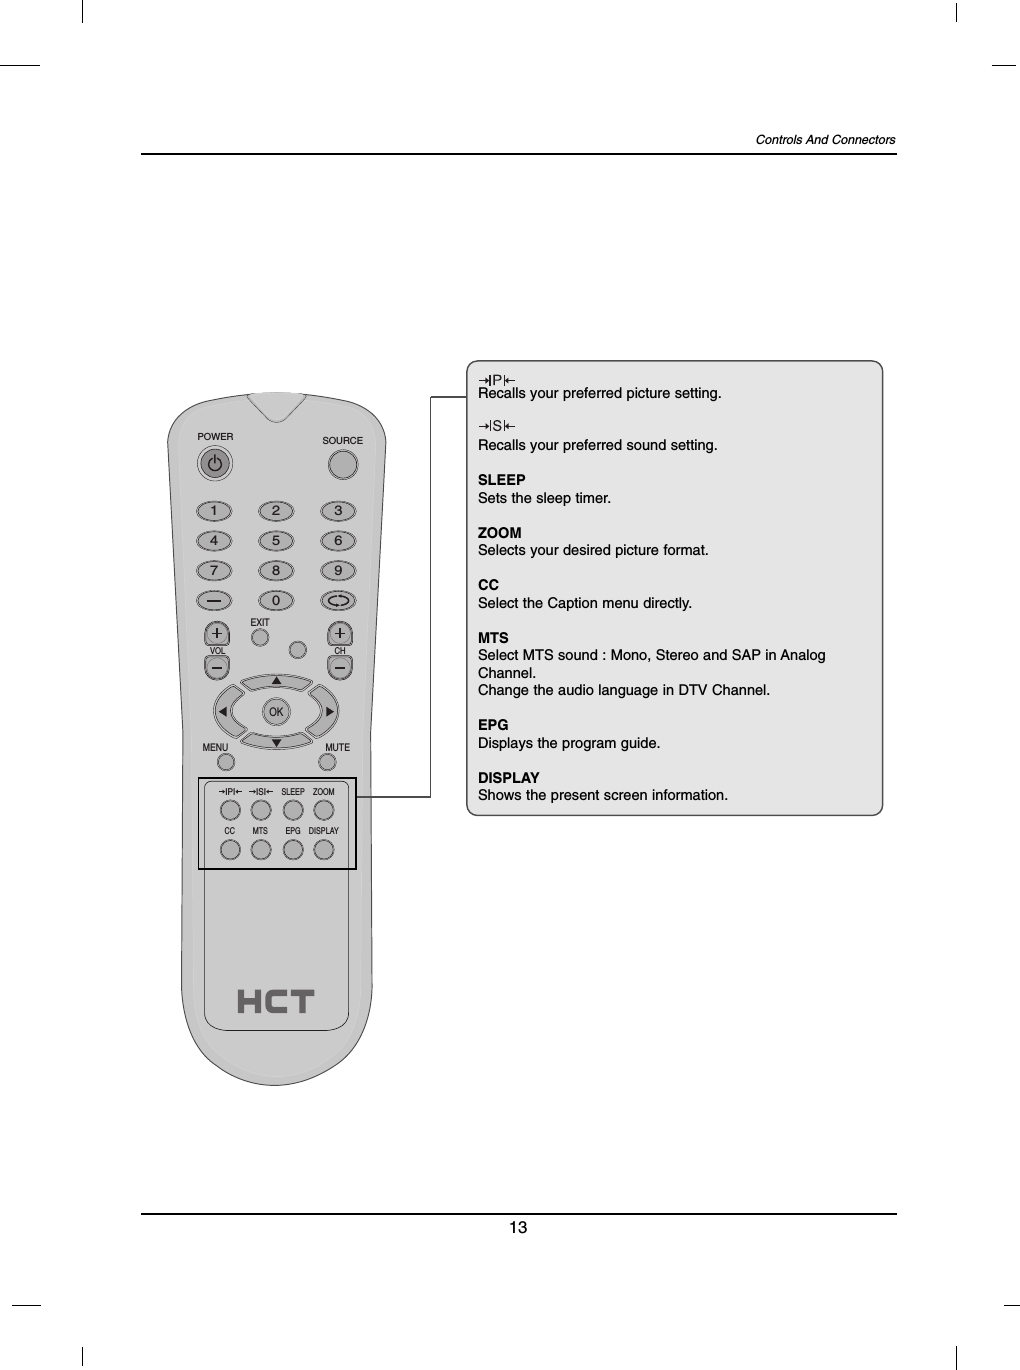 Controls And Connectors131 2 34 5 67 8 90EXITVOL CHMENU MUTEOKSOURCEPOWERSLEEP ZOOMIPI ISIEPGMTSCC DISPLAYRecalls your preferred picture setting.Recalls your preferred sound setting.SLEEPSets the sleep timer.ZOOMSelects your desired picture format.CCSelect the Caption menu directly.MTSSelect MTS sound : Mono, Stereo and SAP in AnalogChannel.Change the audio language in DTV Channel.EPGDisplays the program guide.DISPLAYShows the present screen information.